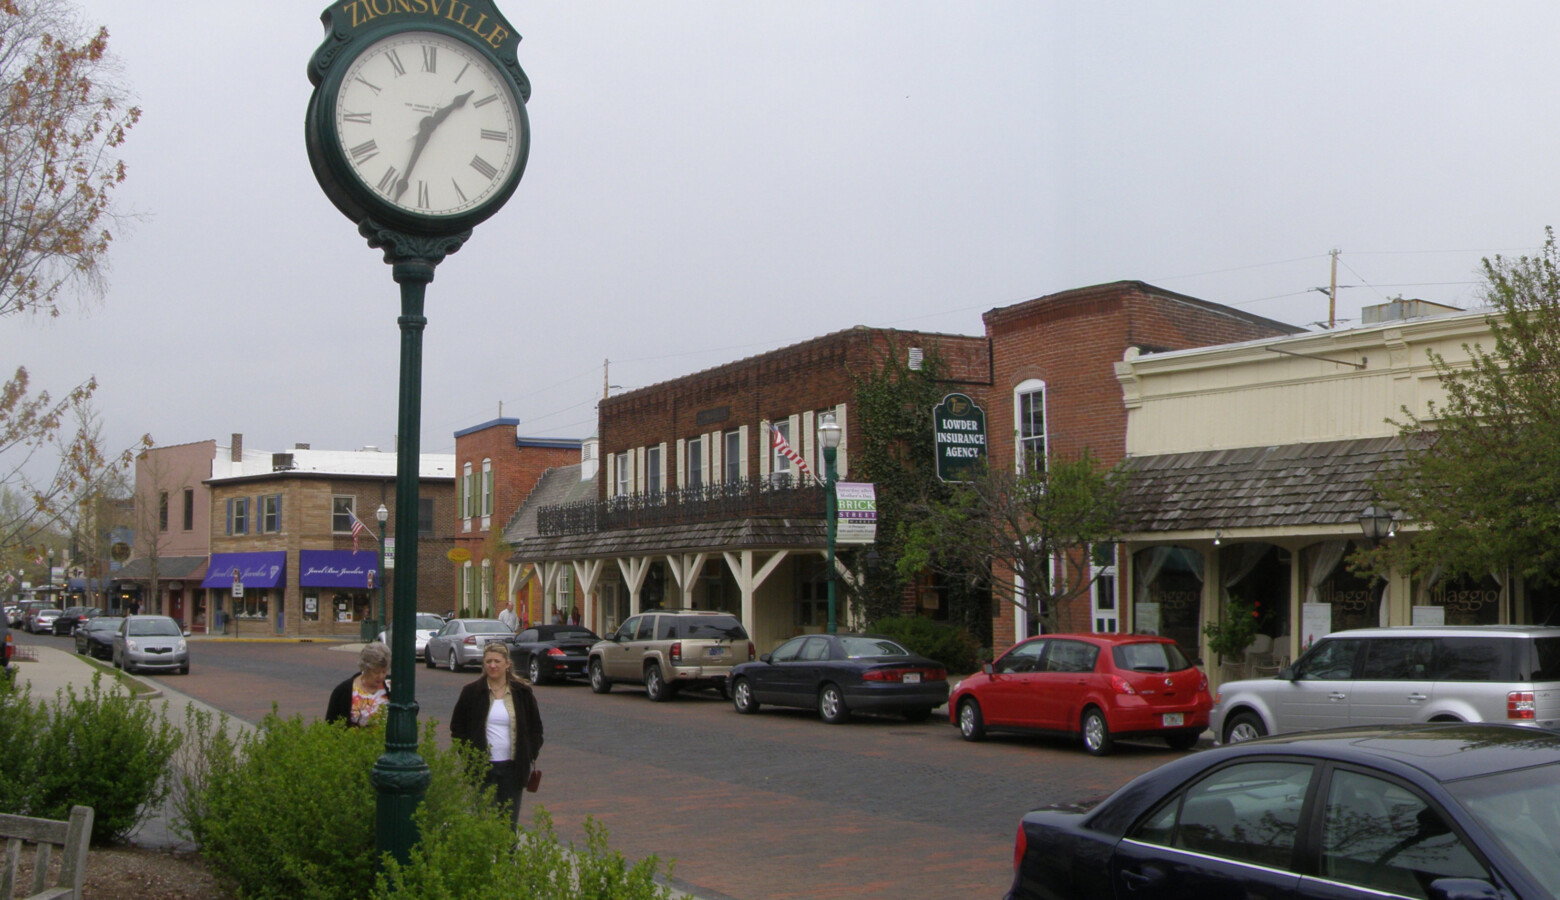 Zionsville is one of nine local governments in Indiana that will undertake projects to reduce their greenhouse gas emissions. (Chris Light/Wikimedia Commons)